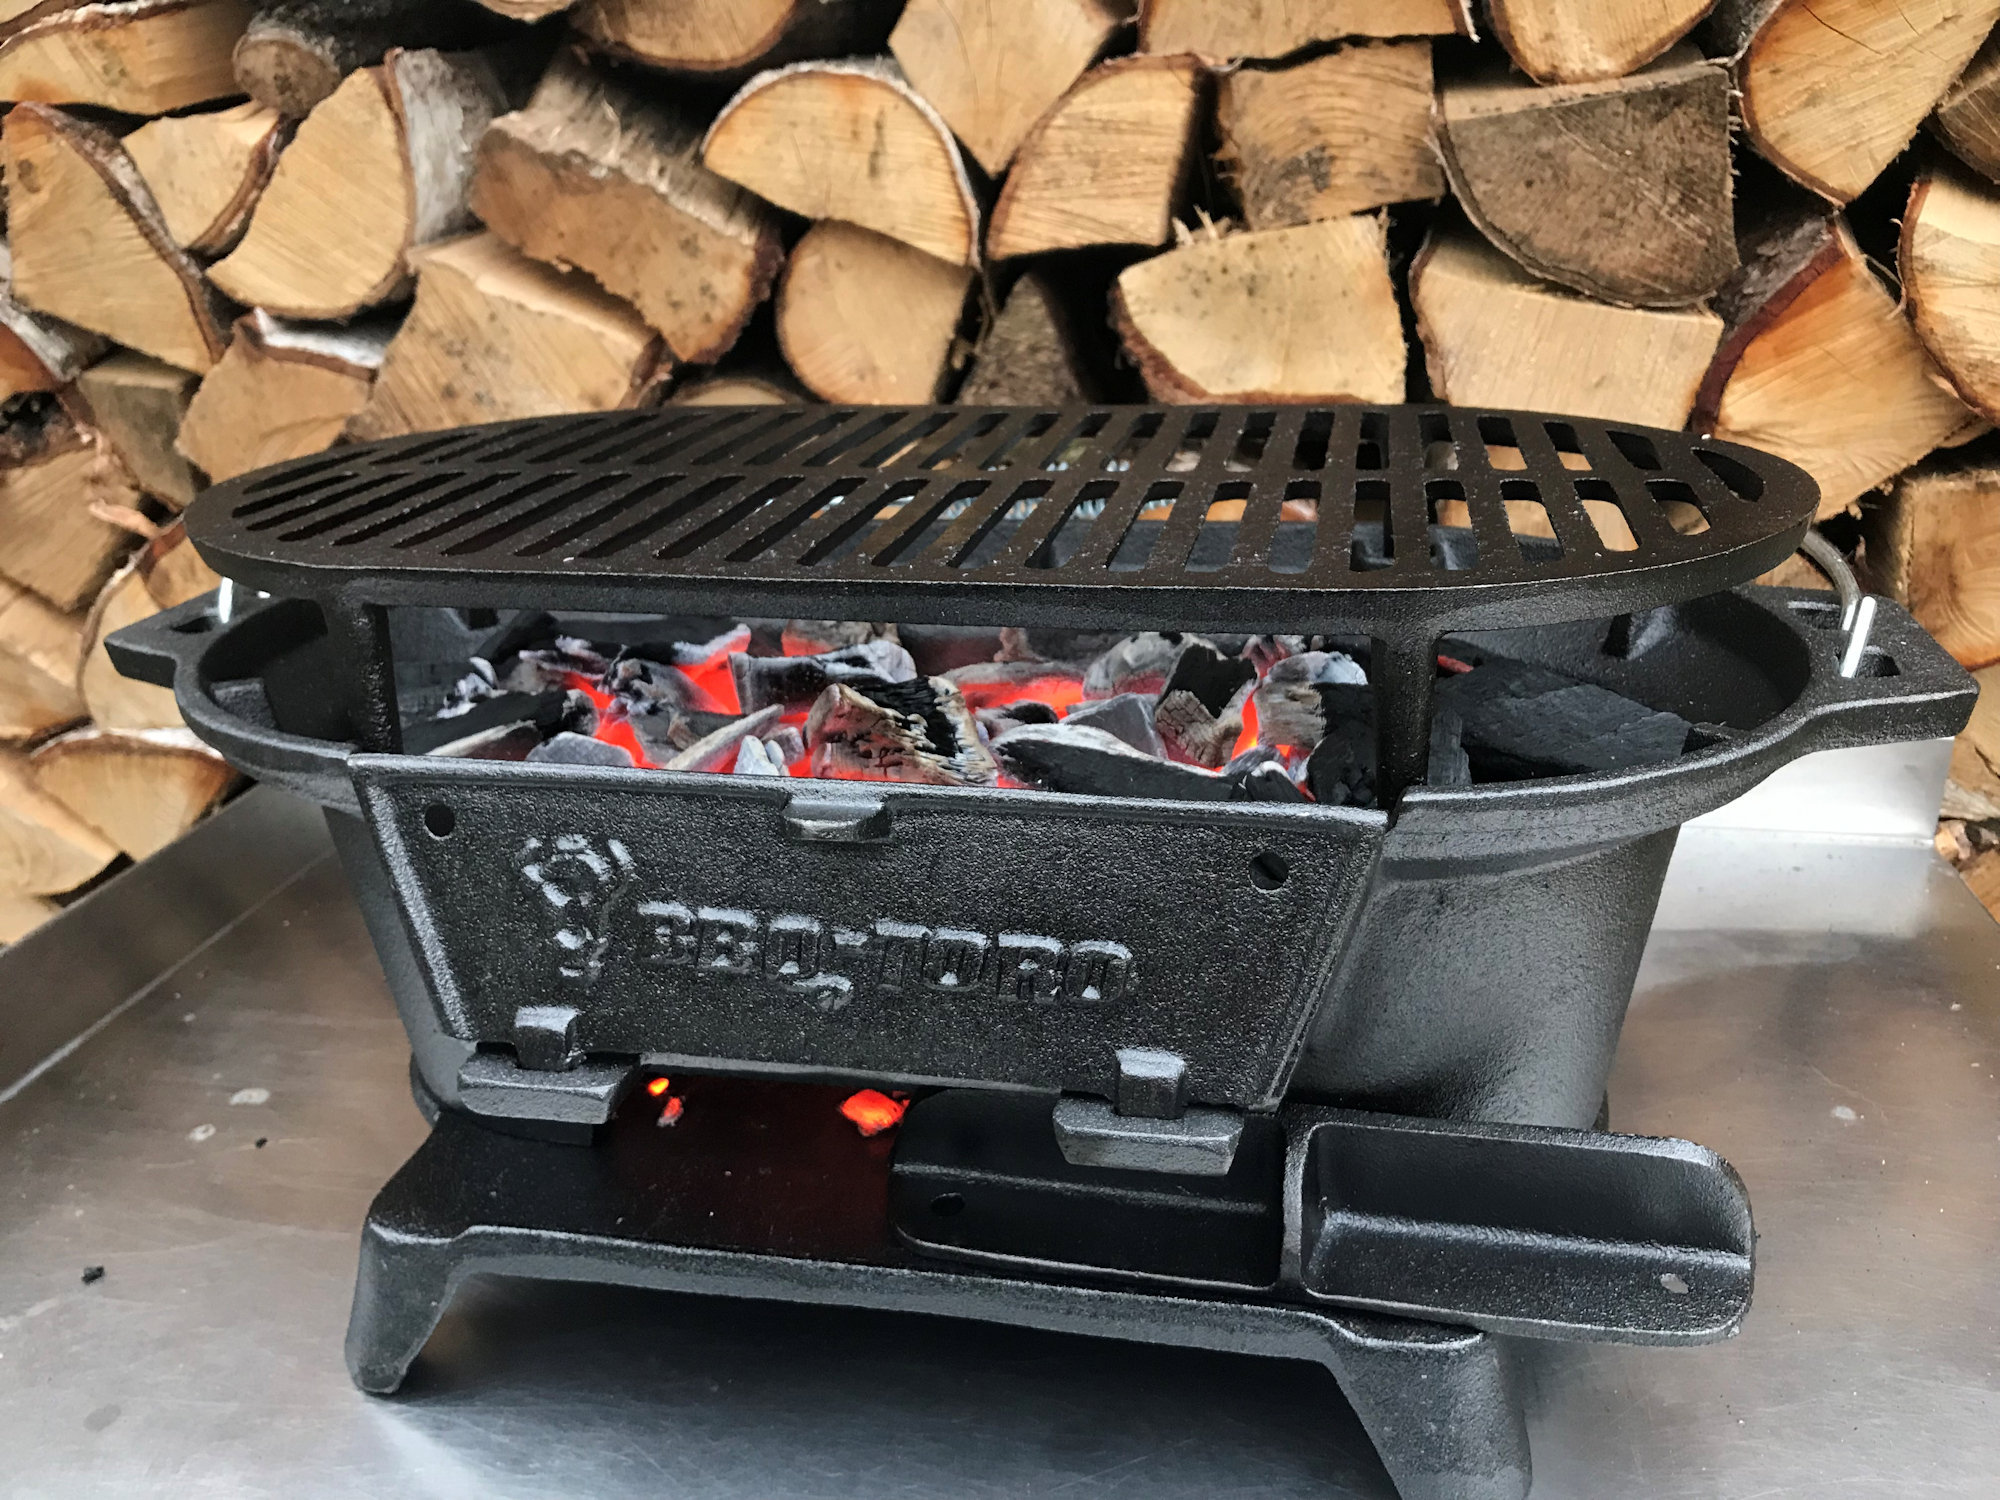 BBQ-Toro Gusseisen Grilltopf mit Holzkohle Style Campinggrill | Grillrost eBay Hibachi